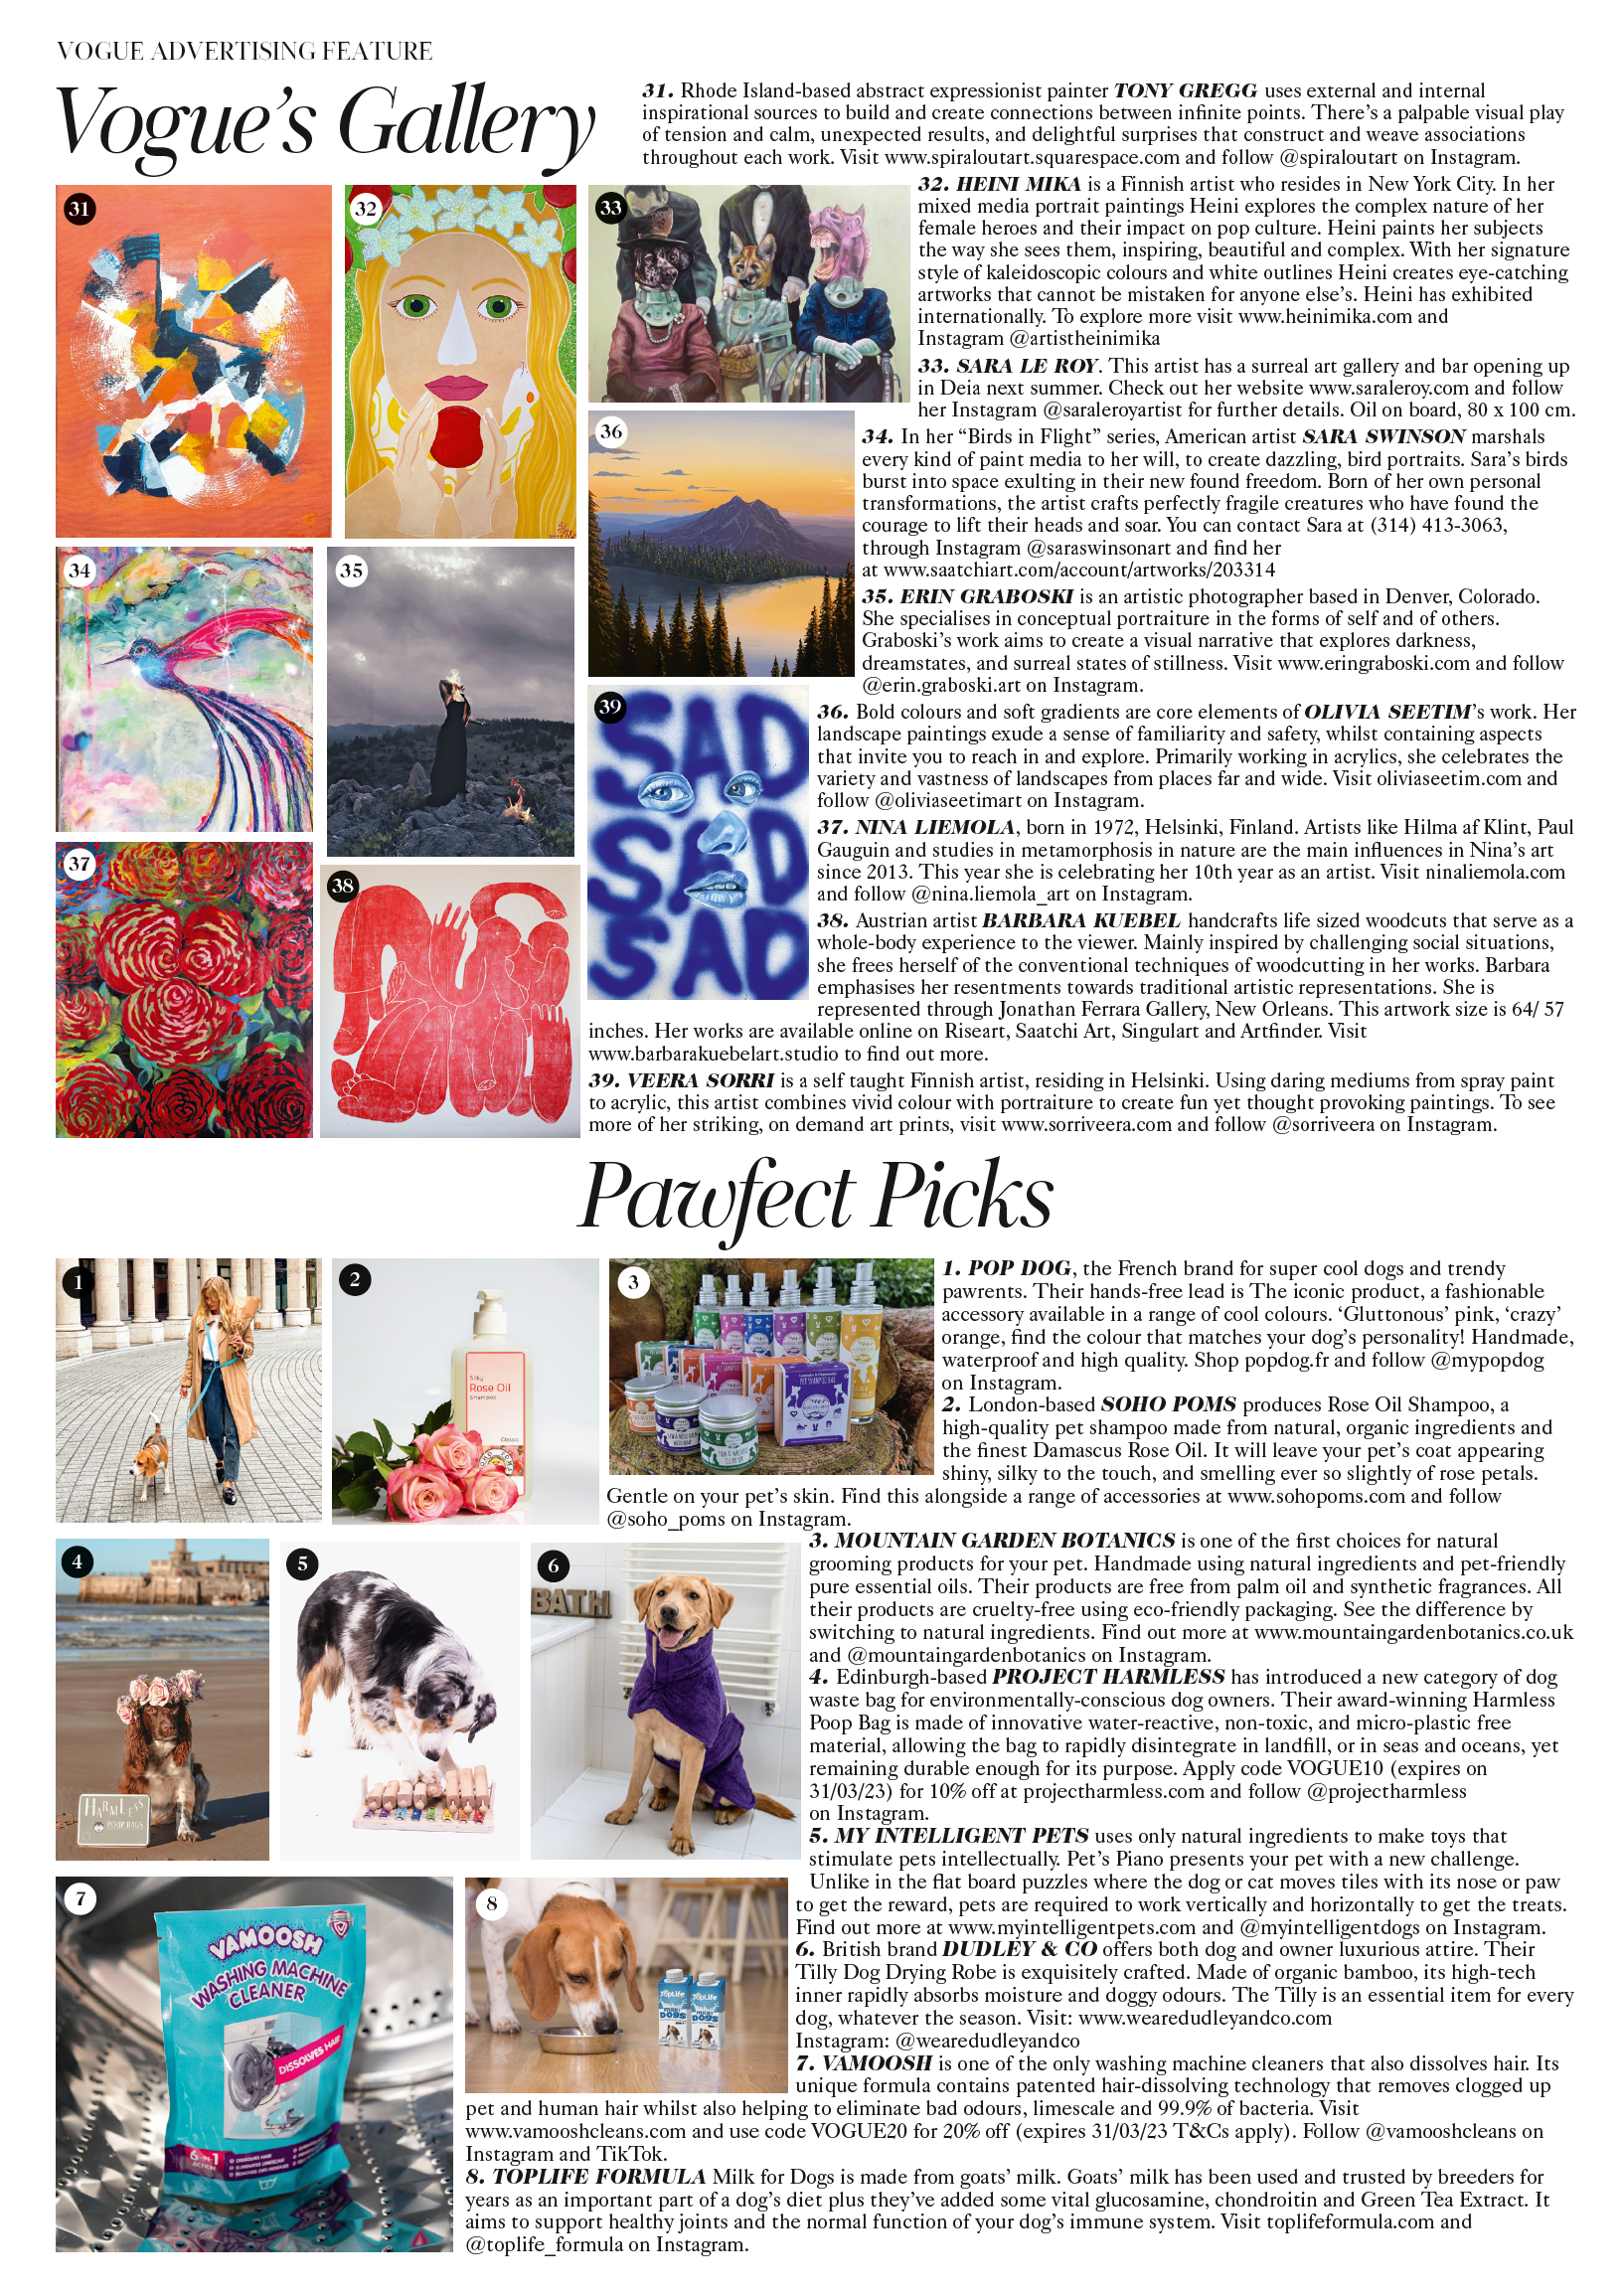 290 Vogue's Gallery - Pawfect Picks.png